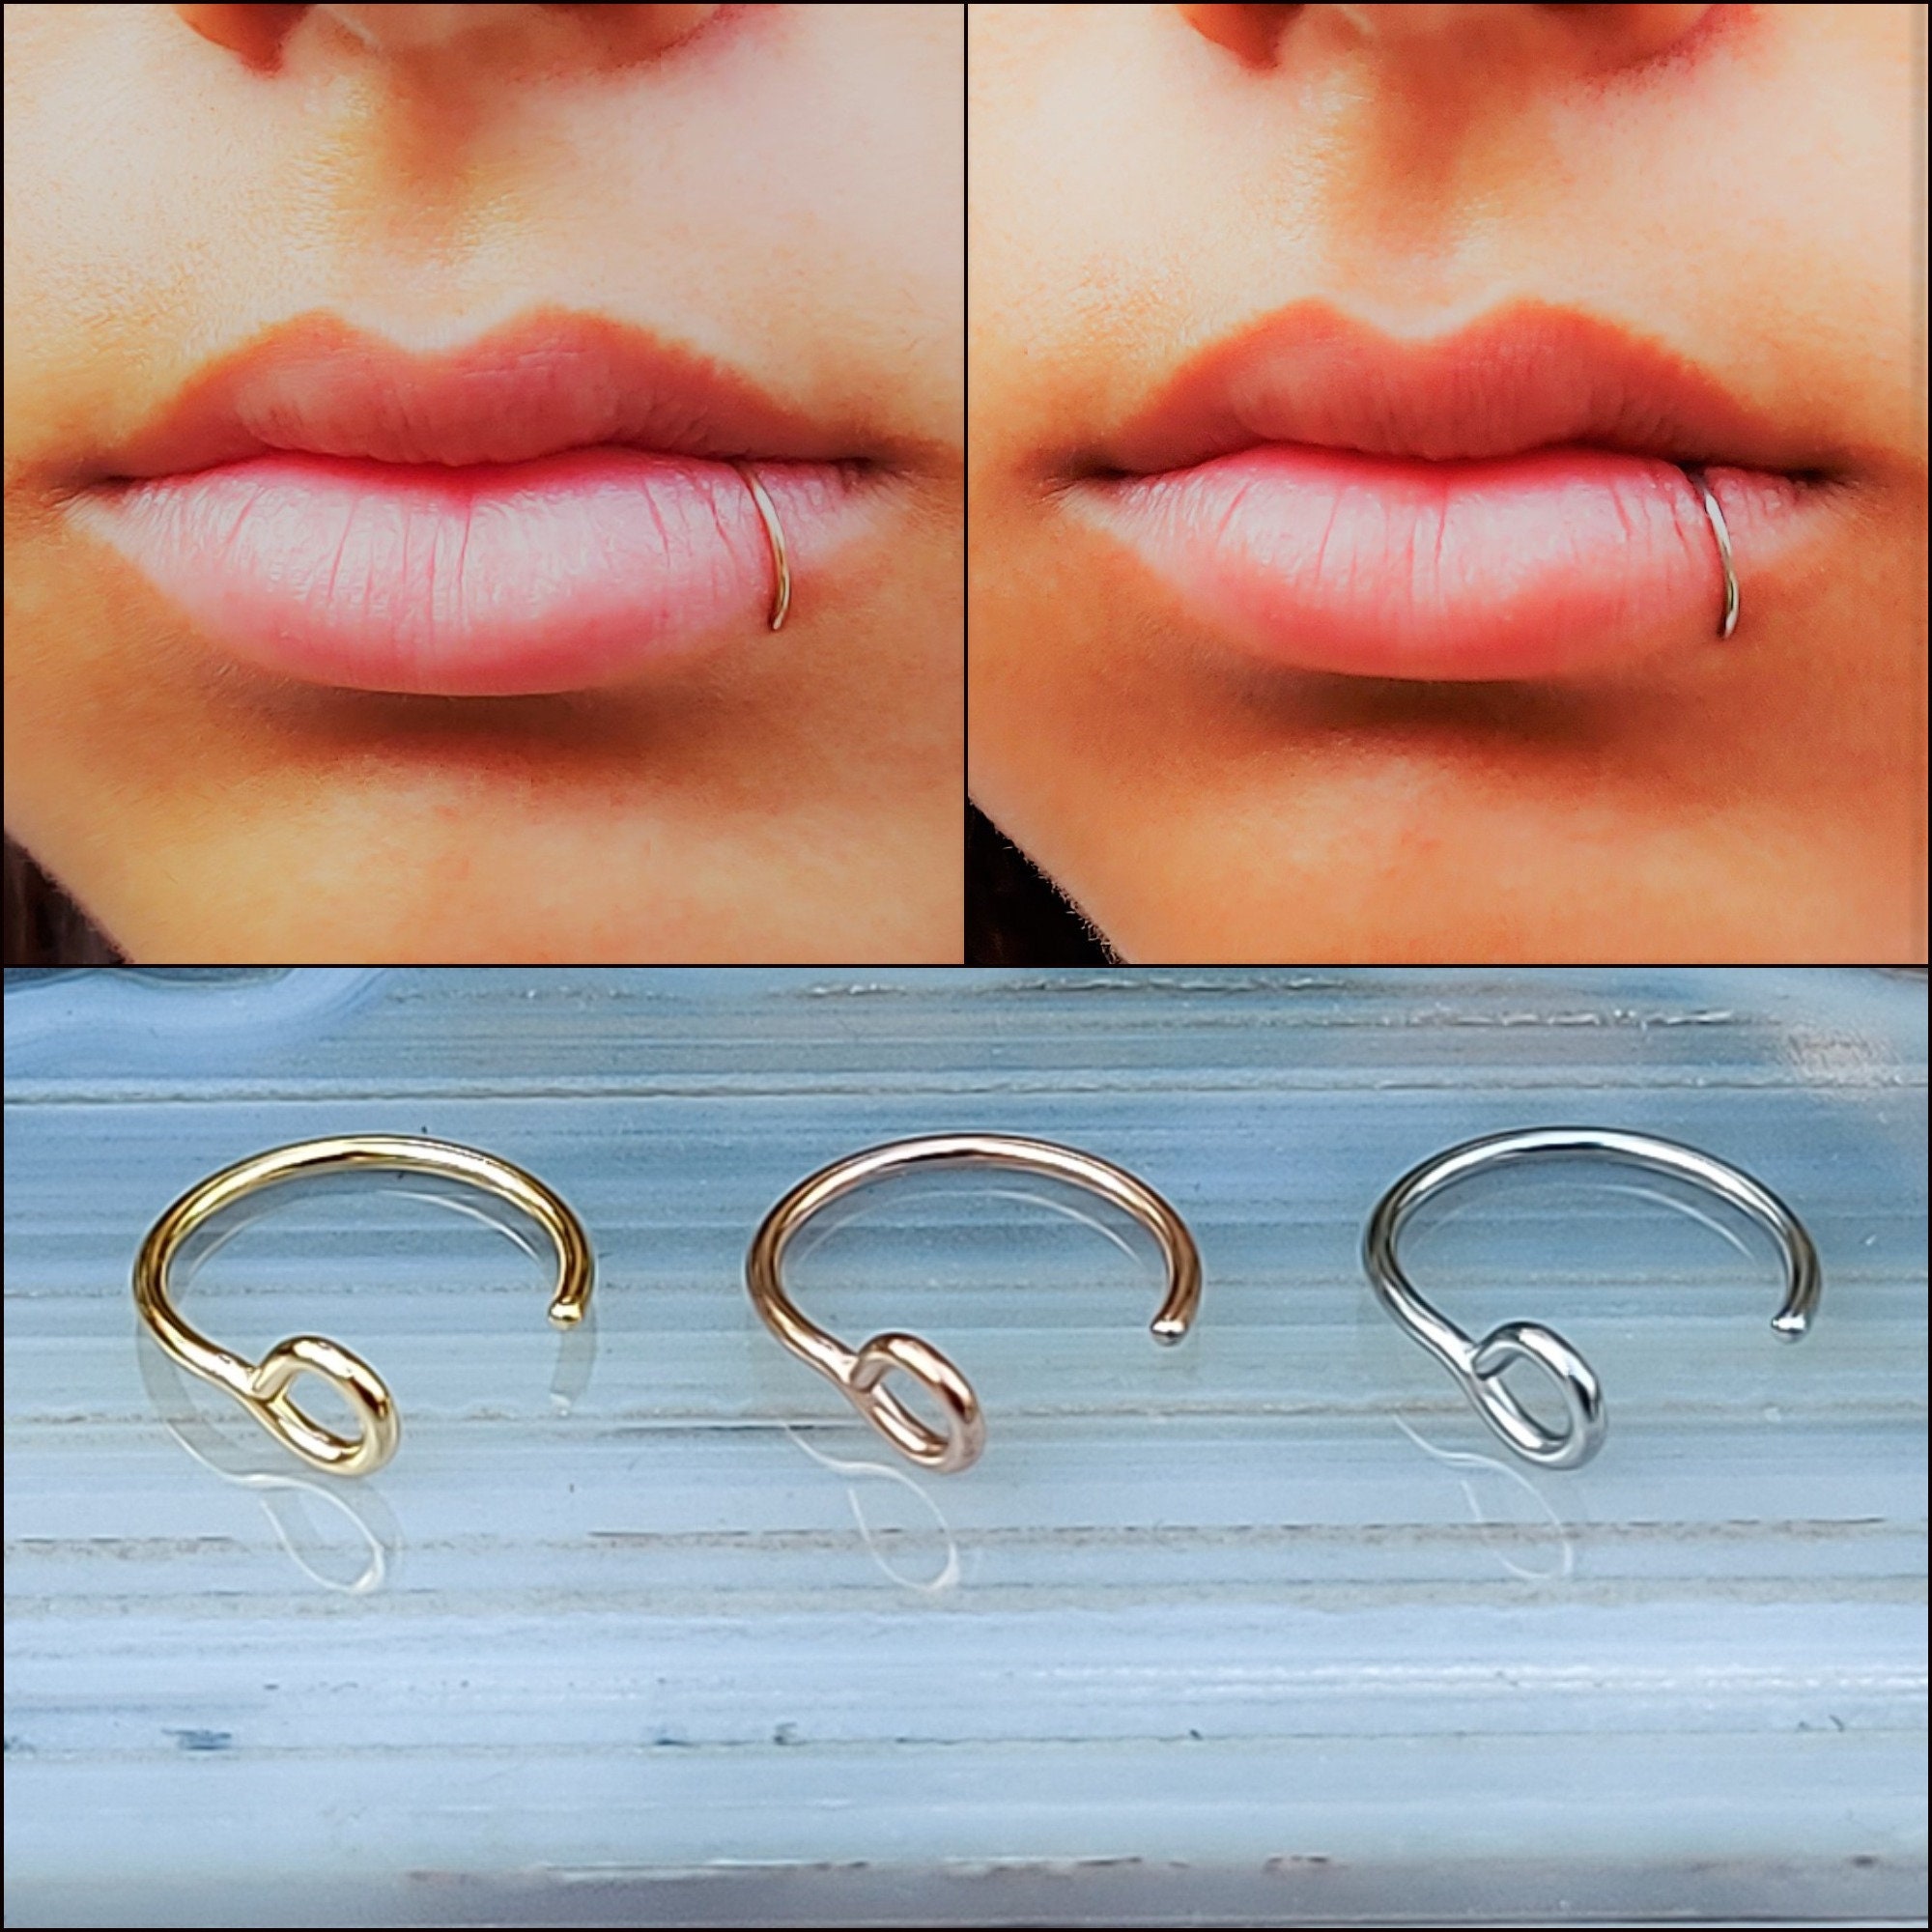 Amazon.com: Fake Lip Ring 20 Gauge Non Piercing Hoop - 14k Gold Filled  White Opal Faux Lip Piercing - No Piercing Need Lip Rings : Handmade  Products